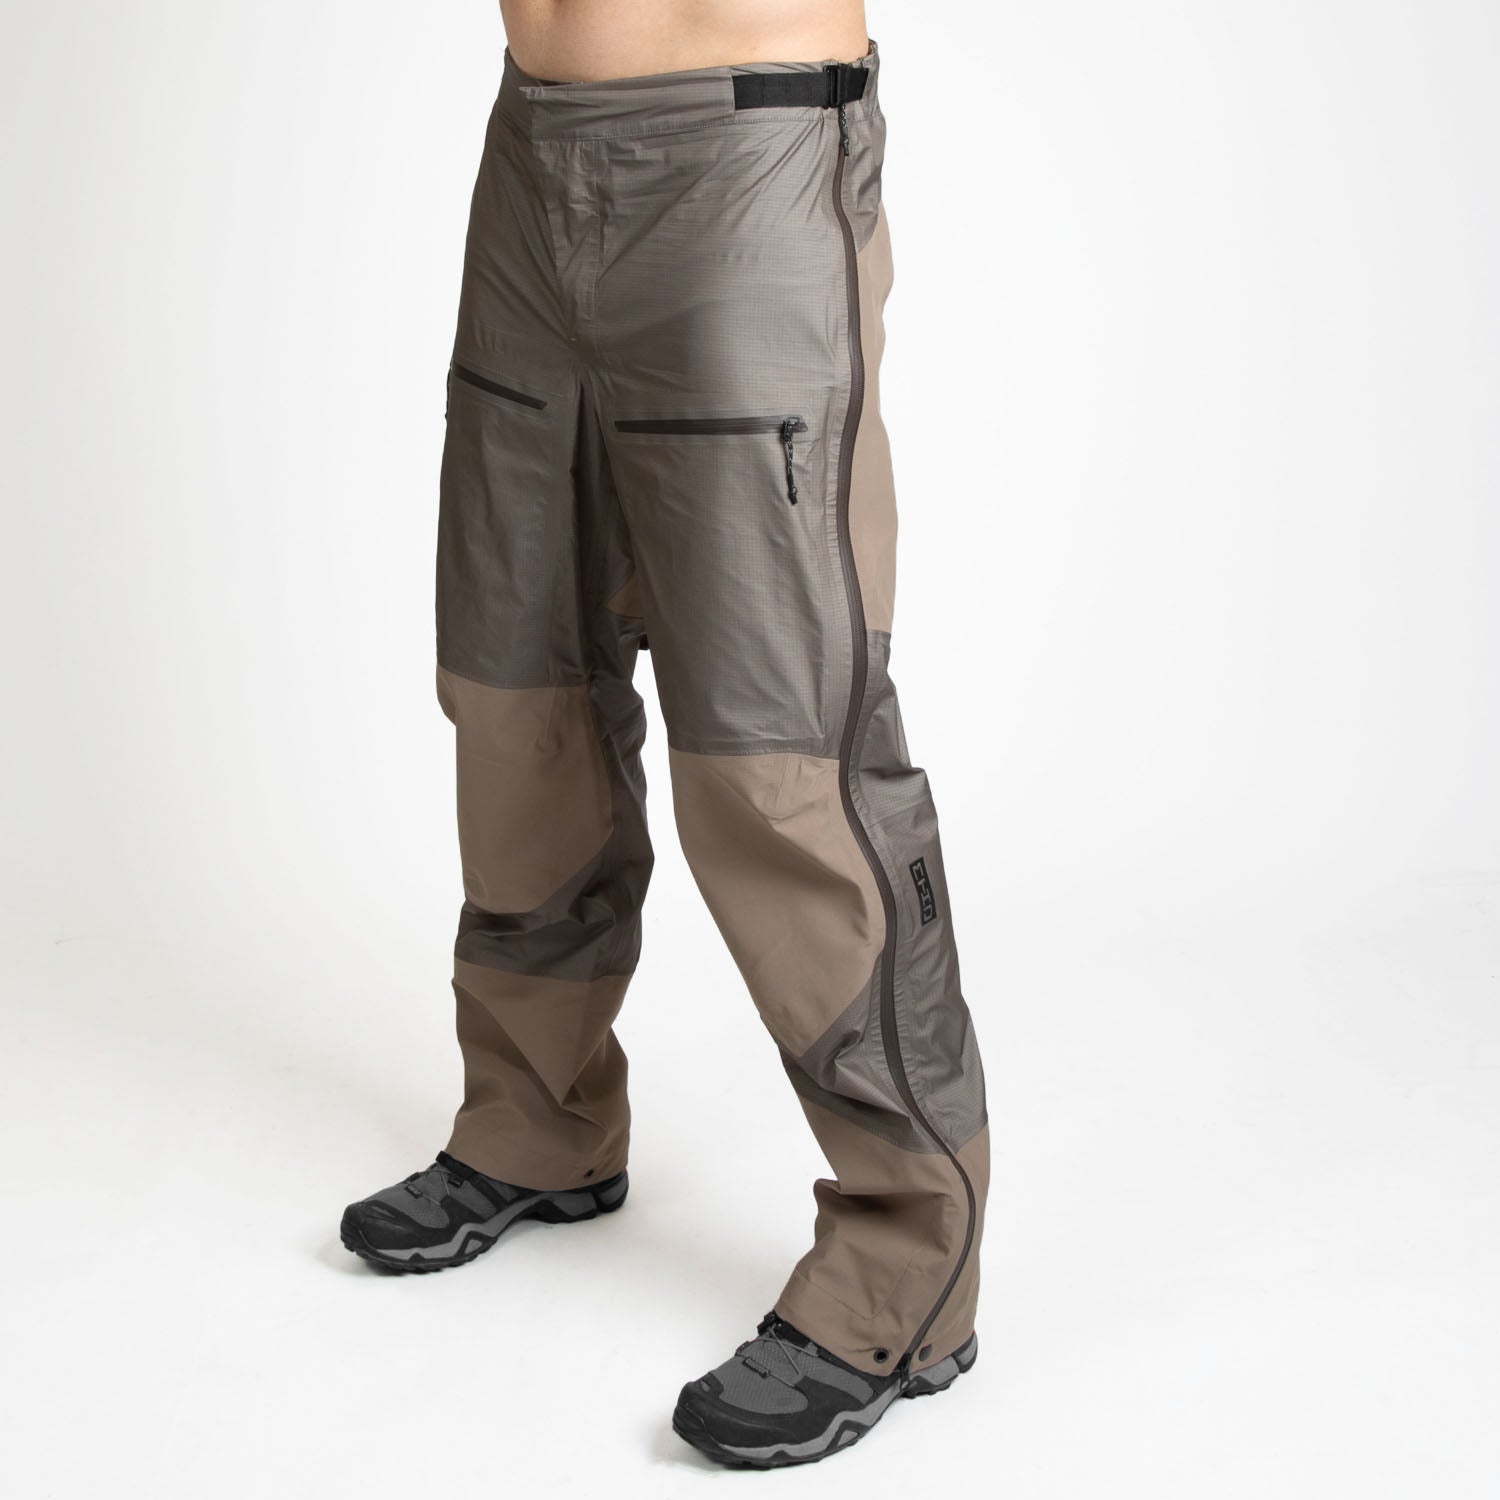 MTHD Mountain eVent™ DVstorm DVexpedition Hardshell 3L Pant L5 Apparel MTHD 